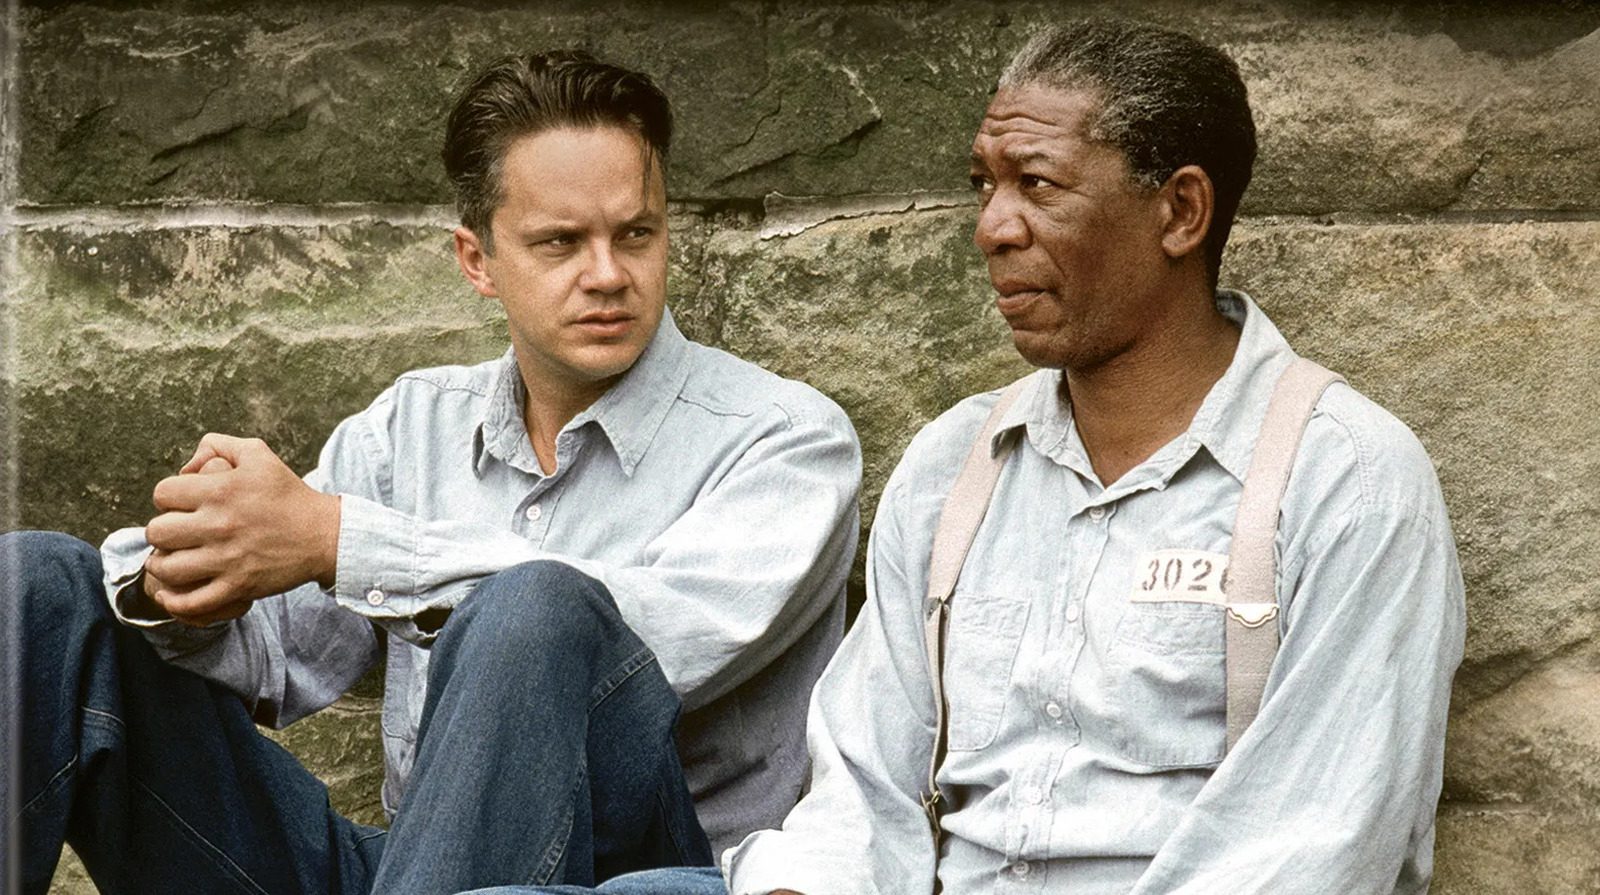 Is The Shawshank Redemption Based on a True Story?